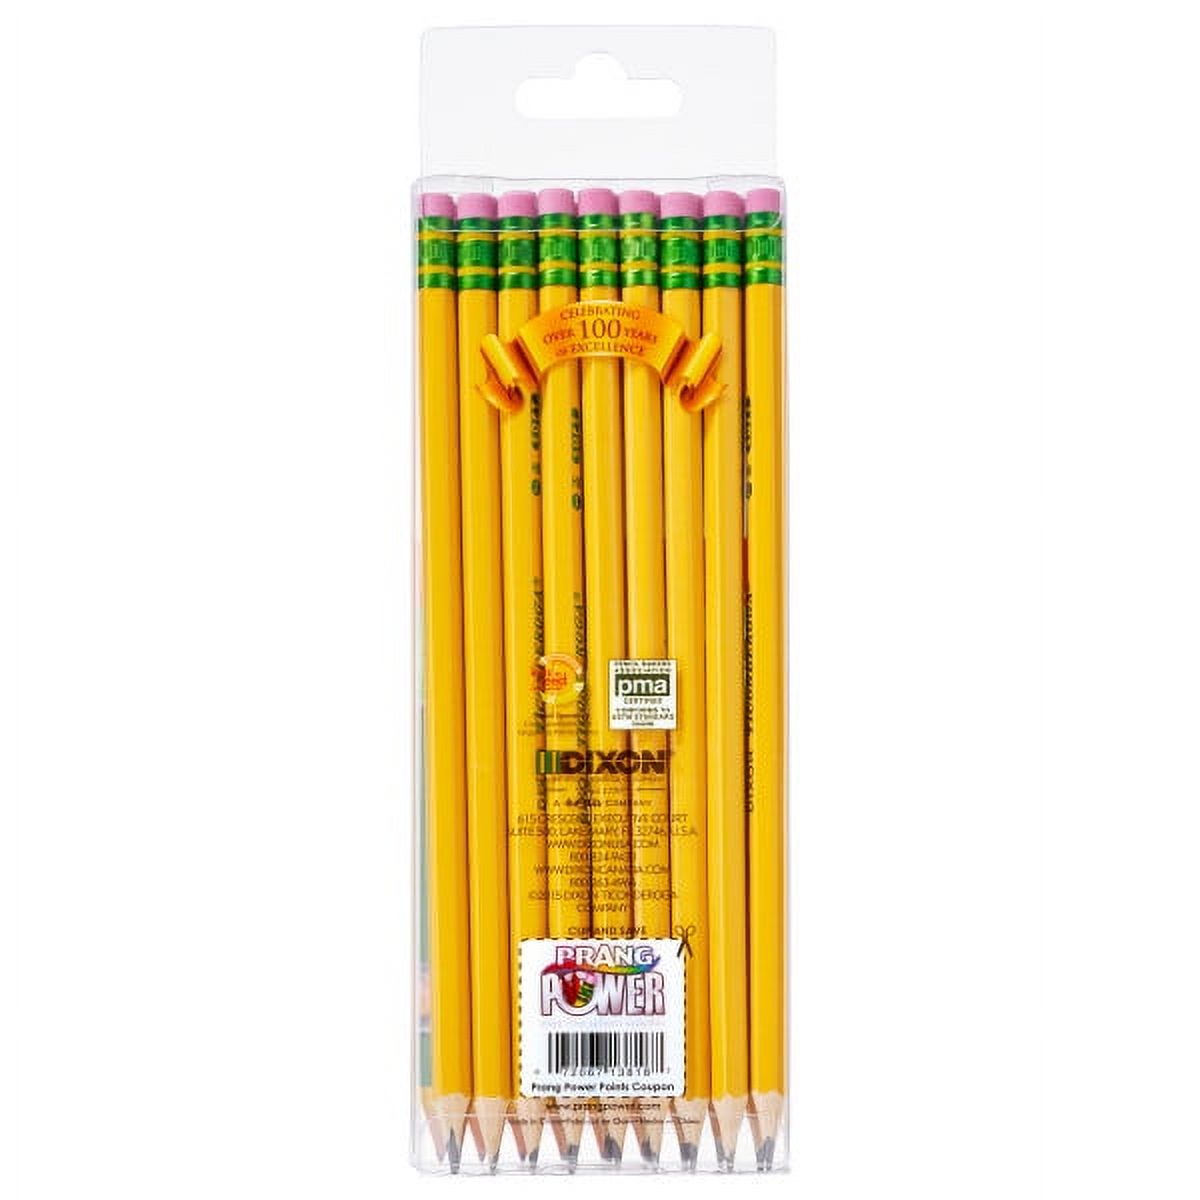 Ticonderoga 13818 #2 Sharpened The World's Best Pencils 18 Count (Pack of 1) - image 2 of 7